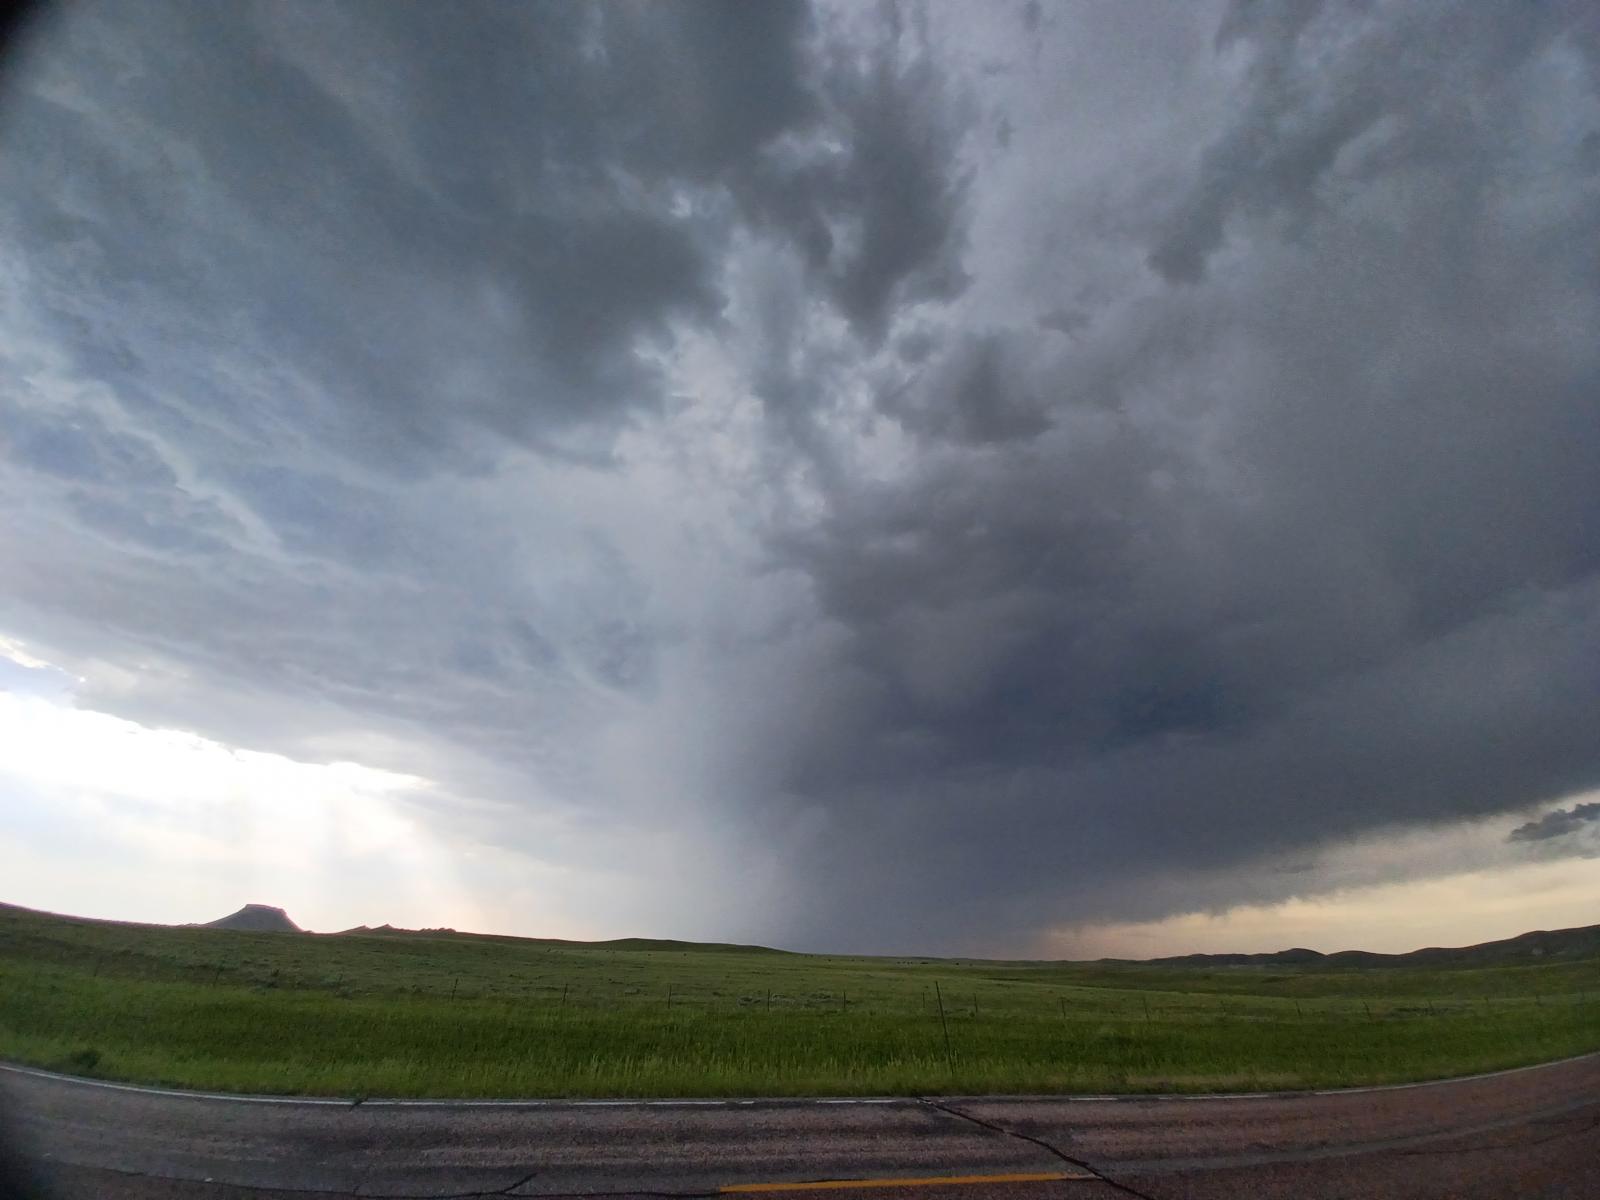 Spectacular storm in Wyoming on Day 7